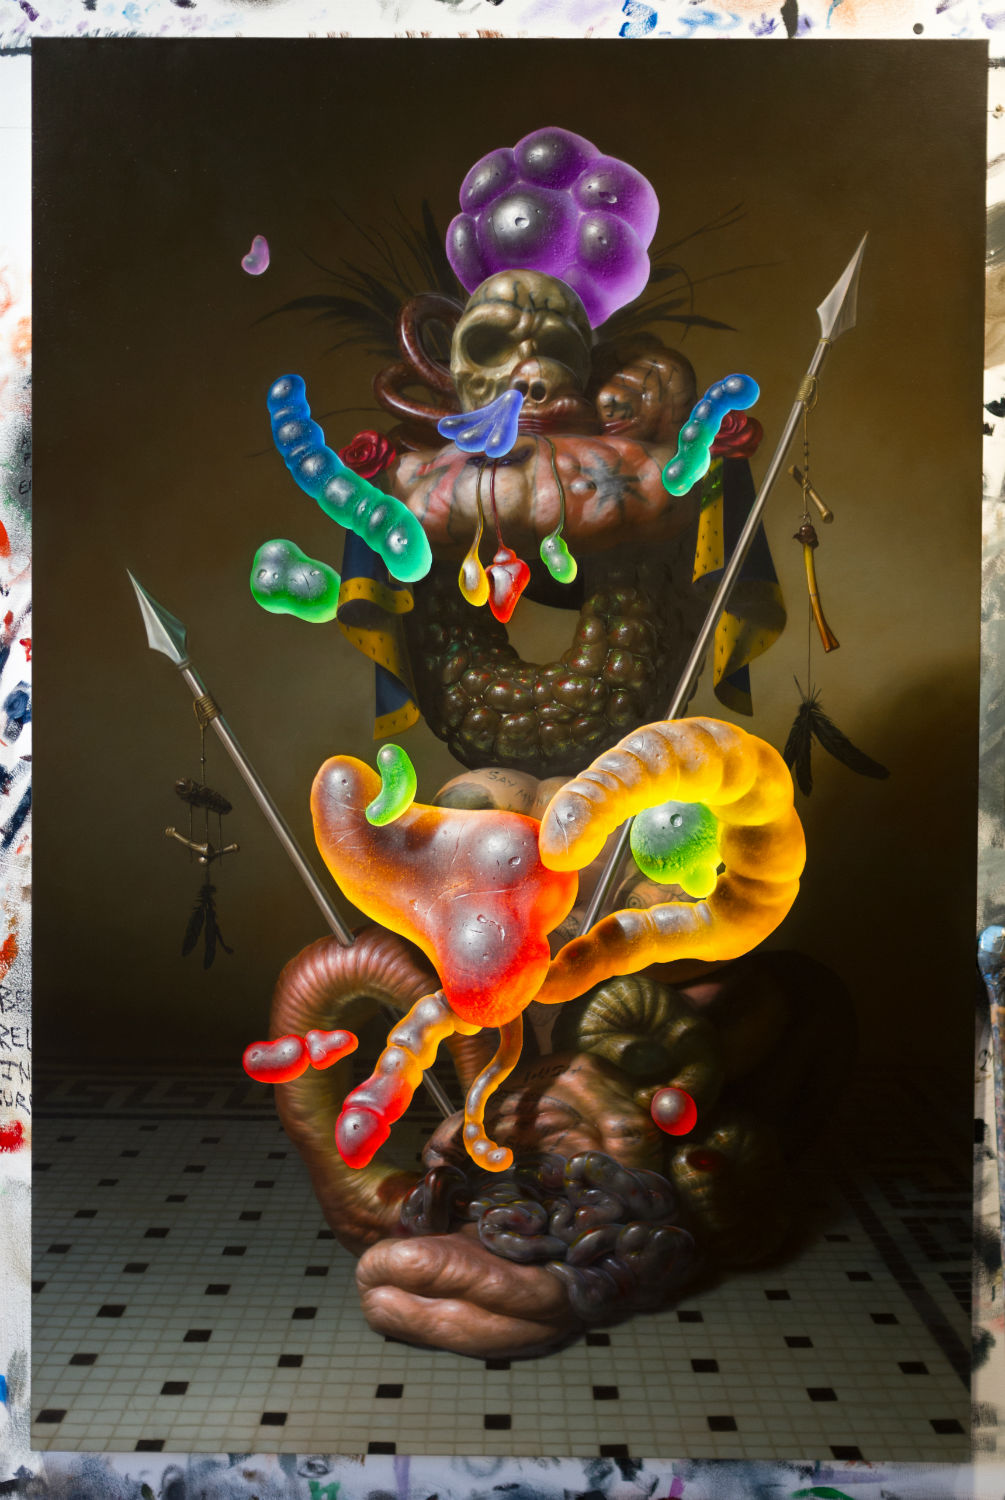 COAT OF ARMS, Oil/Linen, 72x48x1.5", 2016, featured in Juxtapoz x Superflat